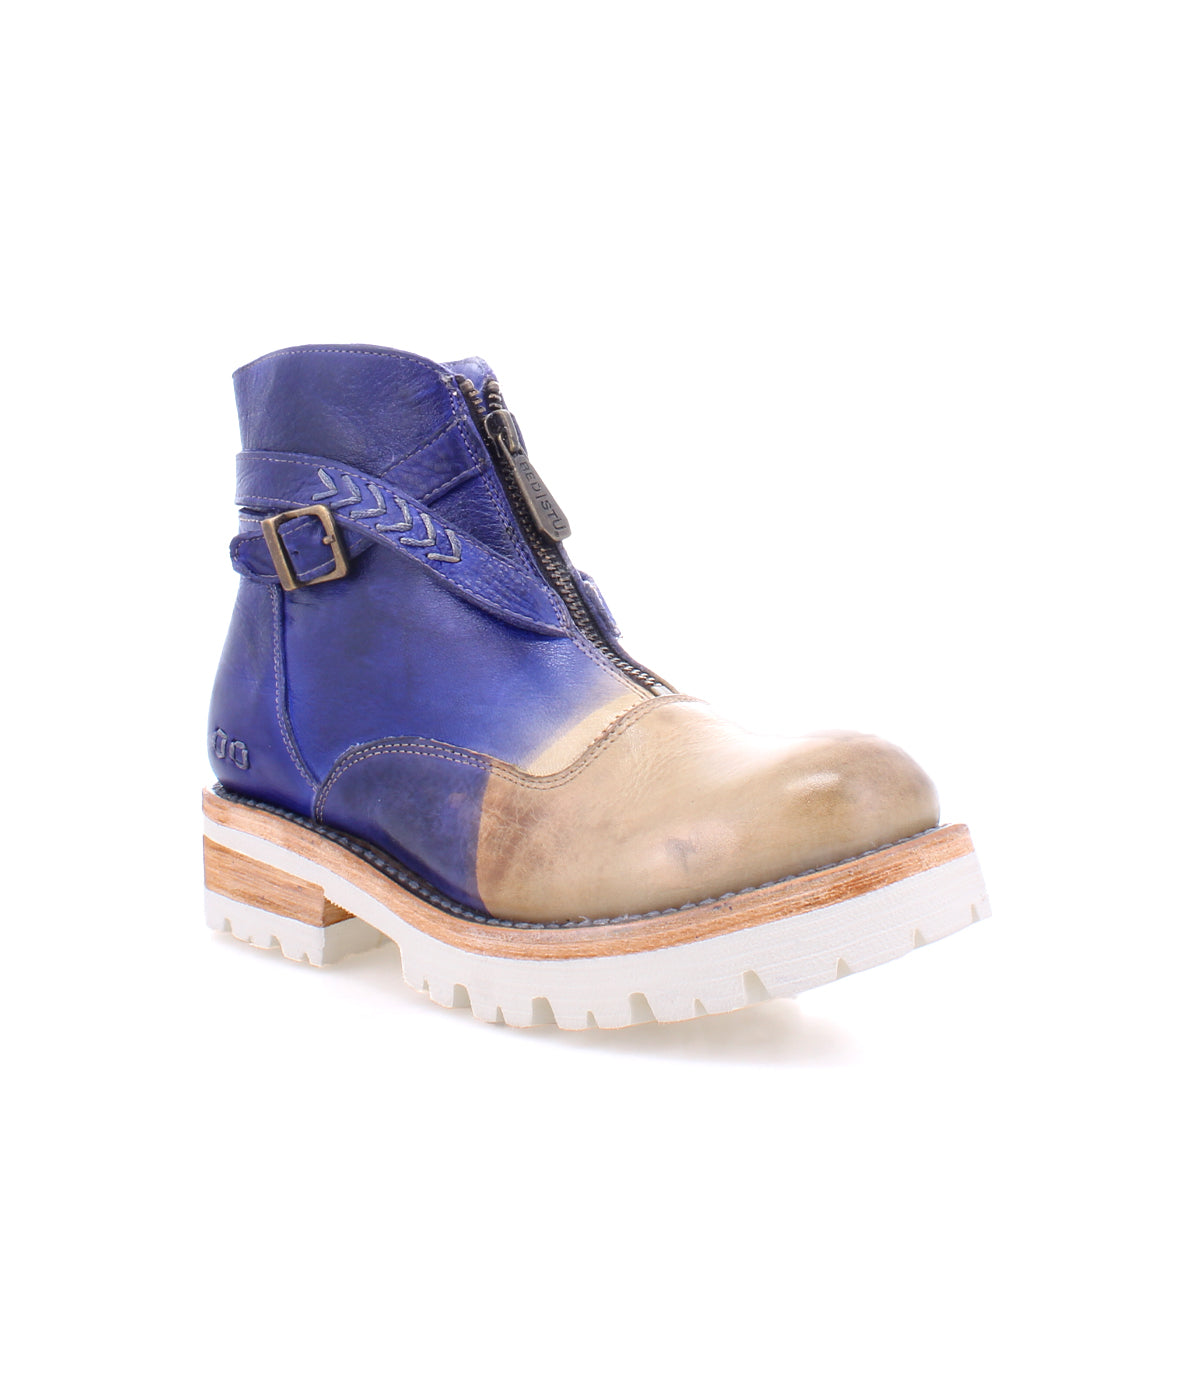 A Dessa ankle boot from Bed Stu, made of blue leather and featuring crisscross straps for added comfort.